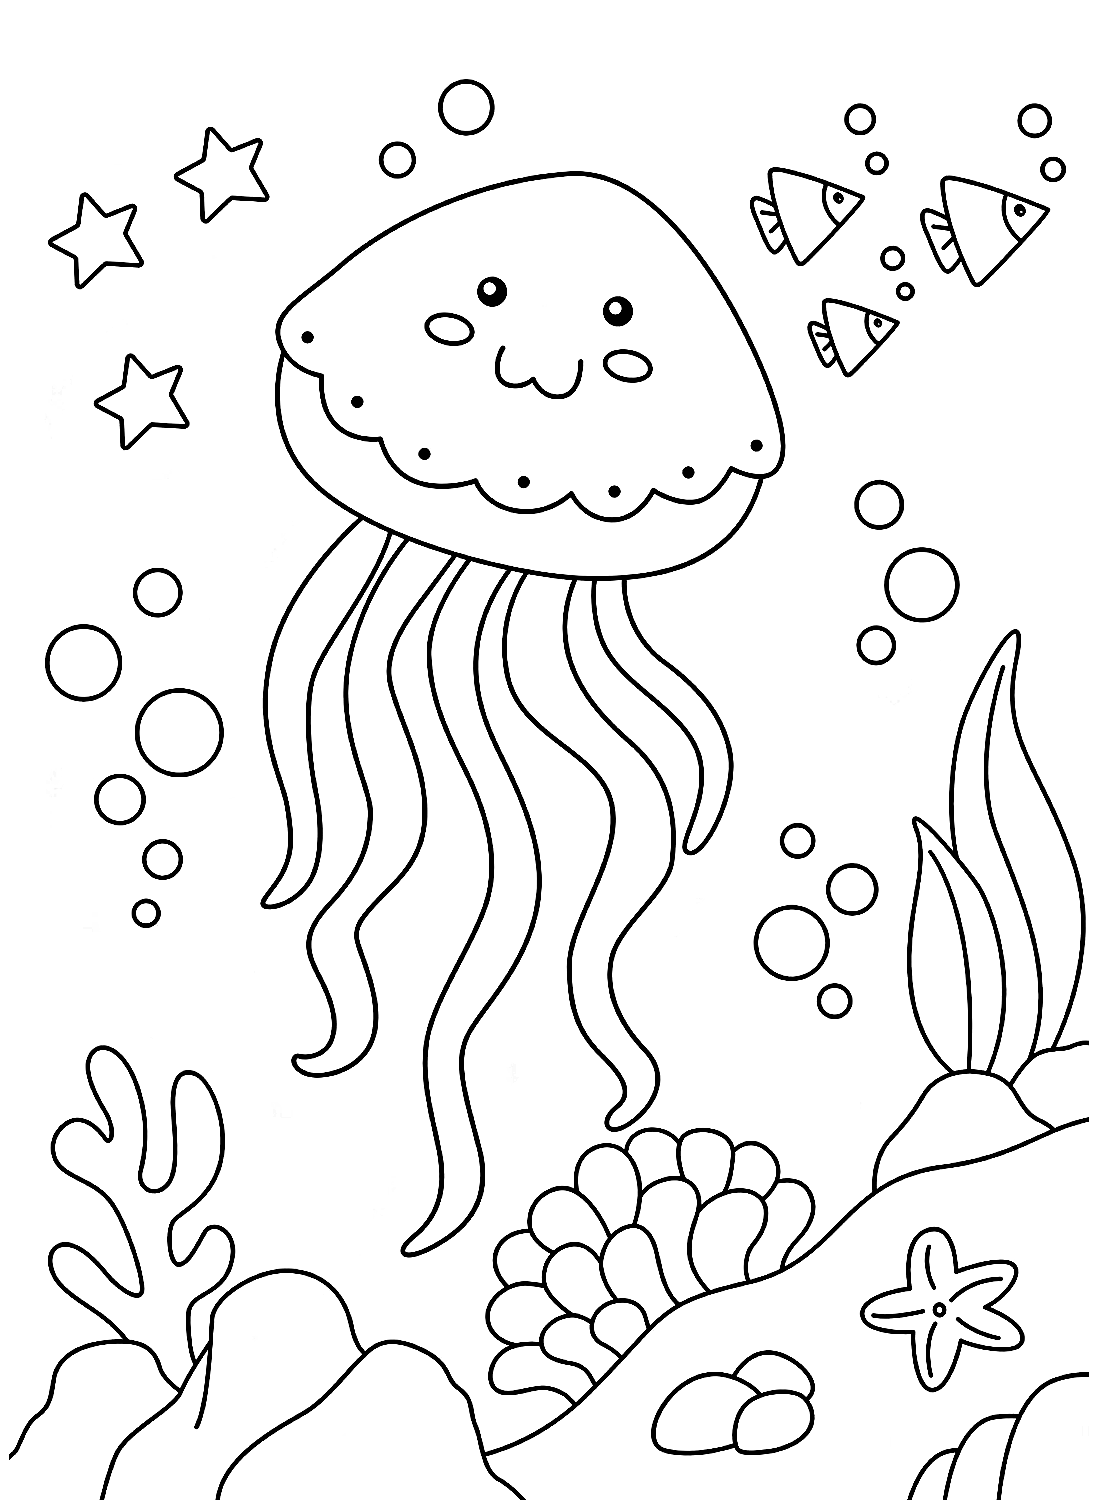 Free Jellyfish Coloring Page